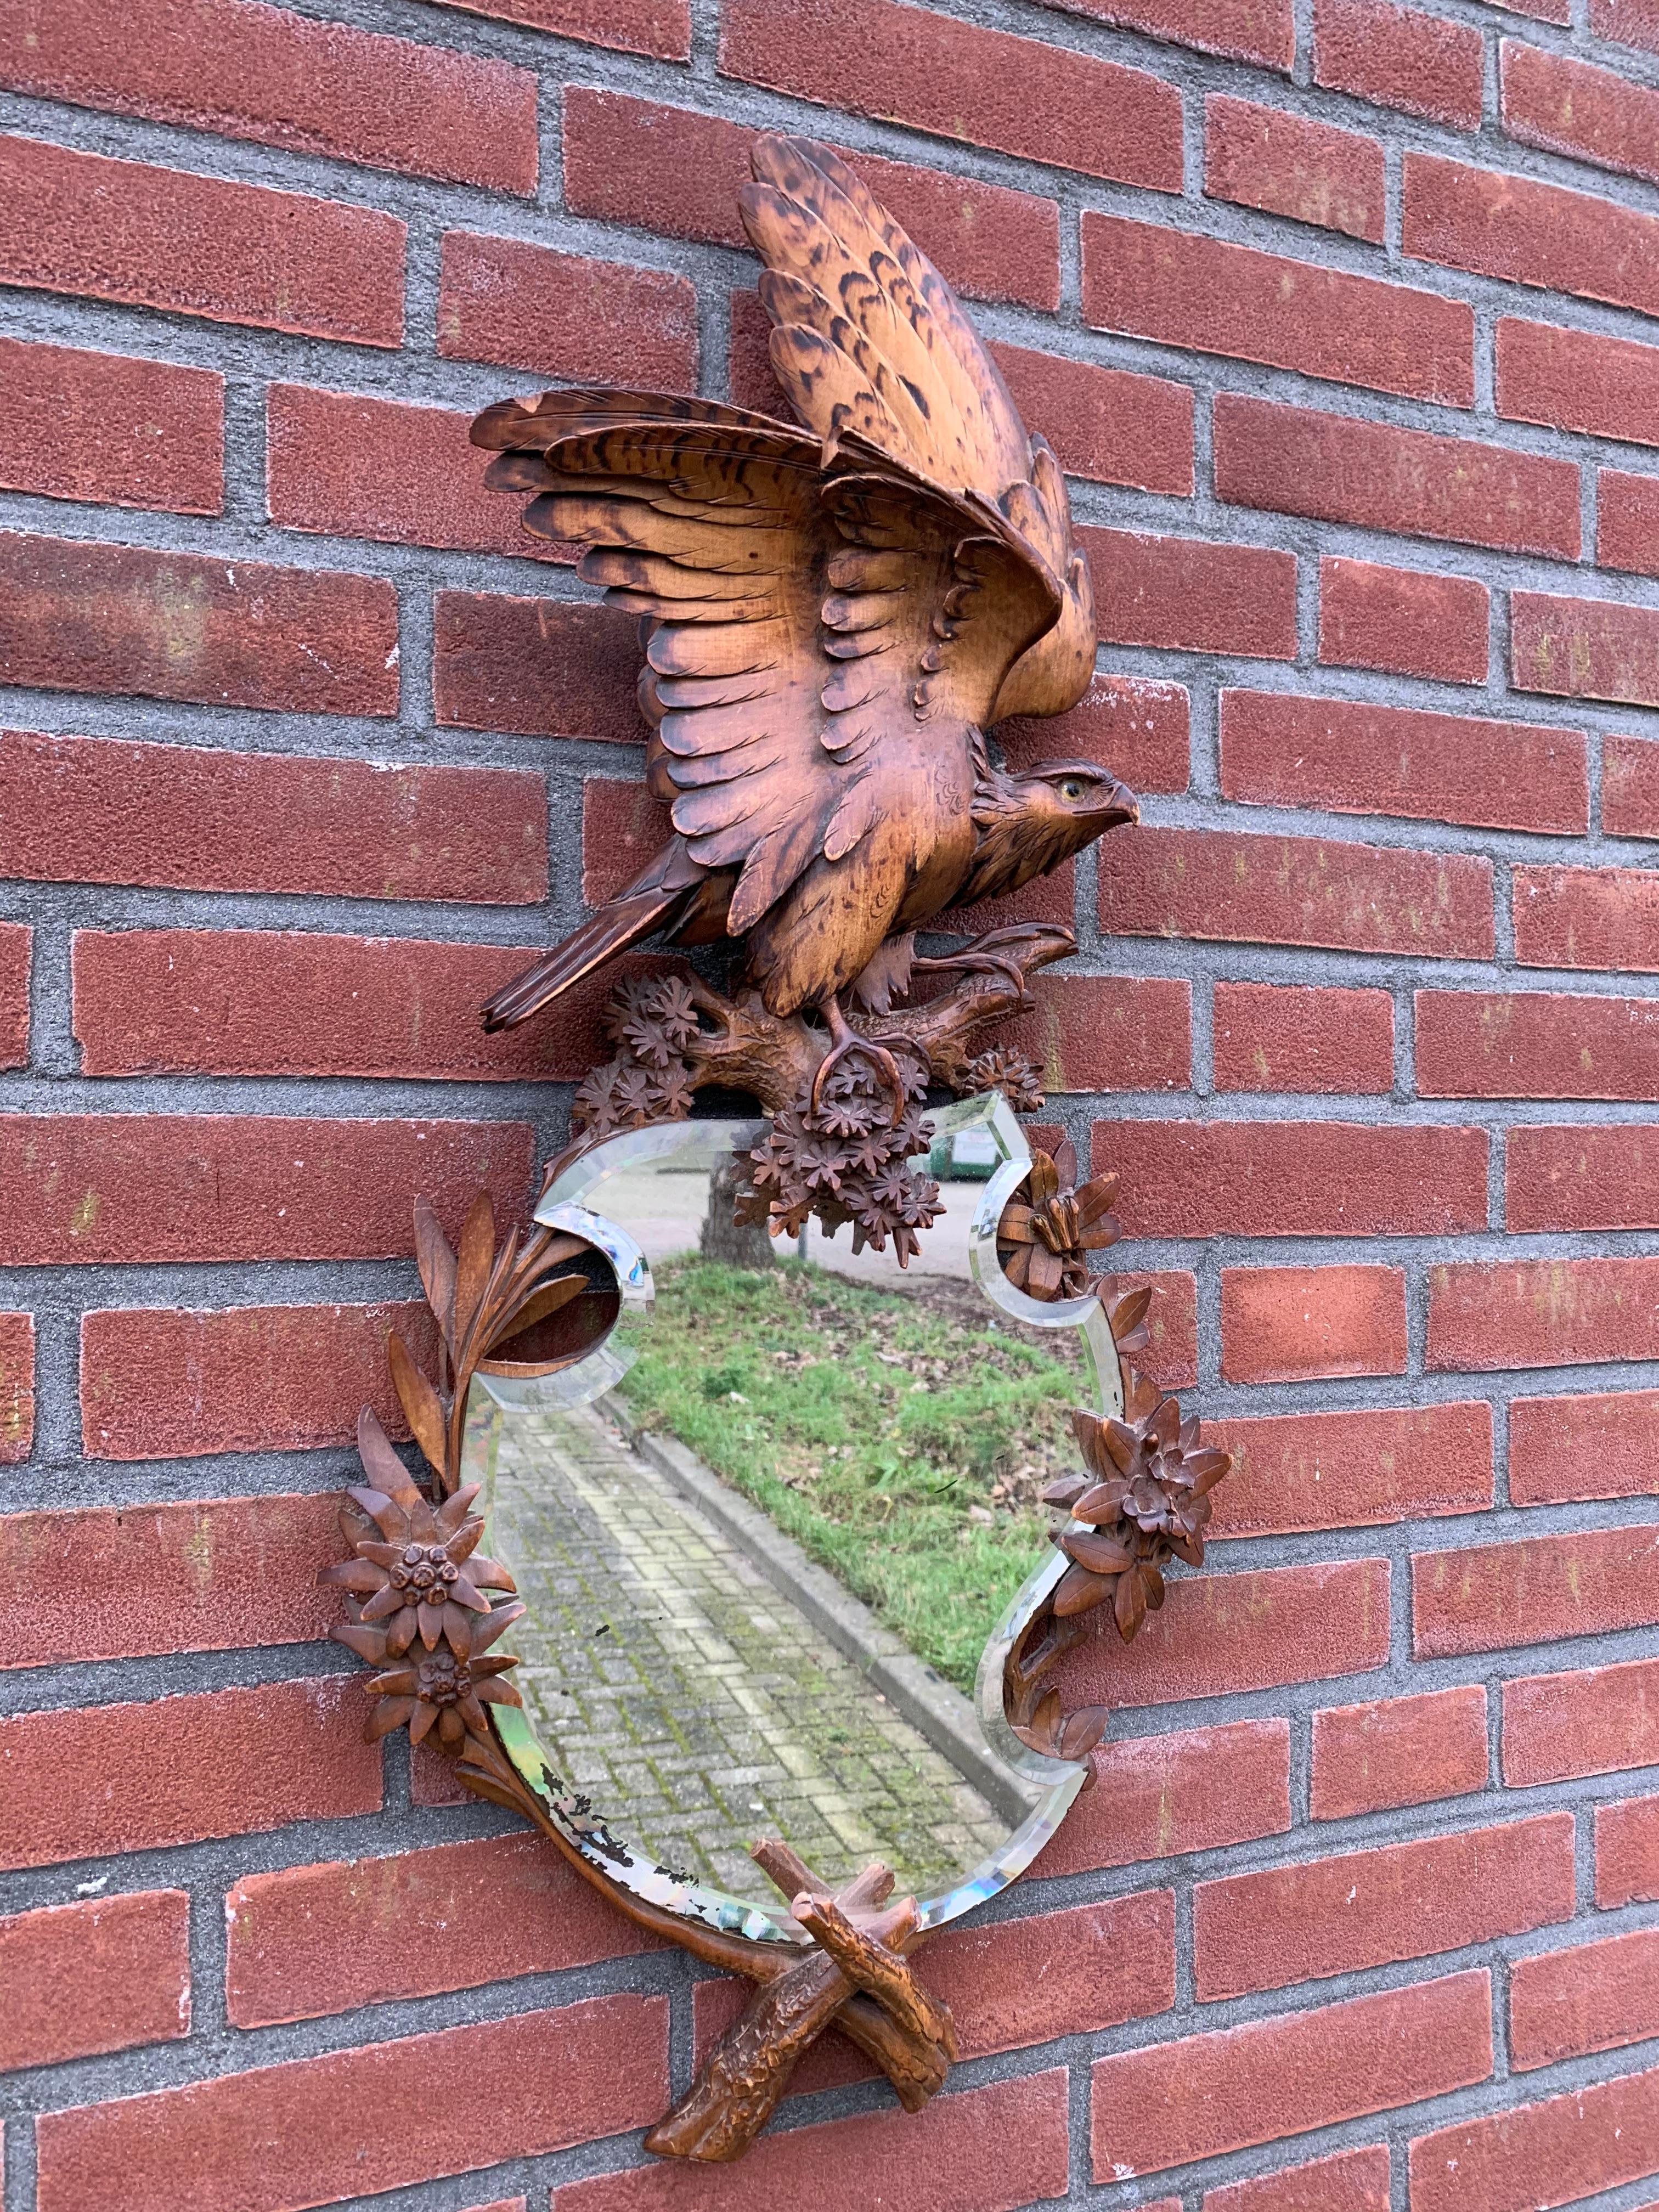 Rare, beautifully carved and highly decorative wall mirror.

If you are appreciative of rare and sculptural antiques then this Swiss BF mirror could be exactly what you are looking for. The quality and the patina of this eagle sculpture and frame